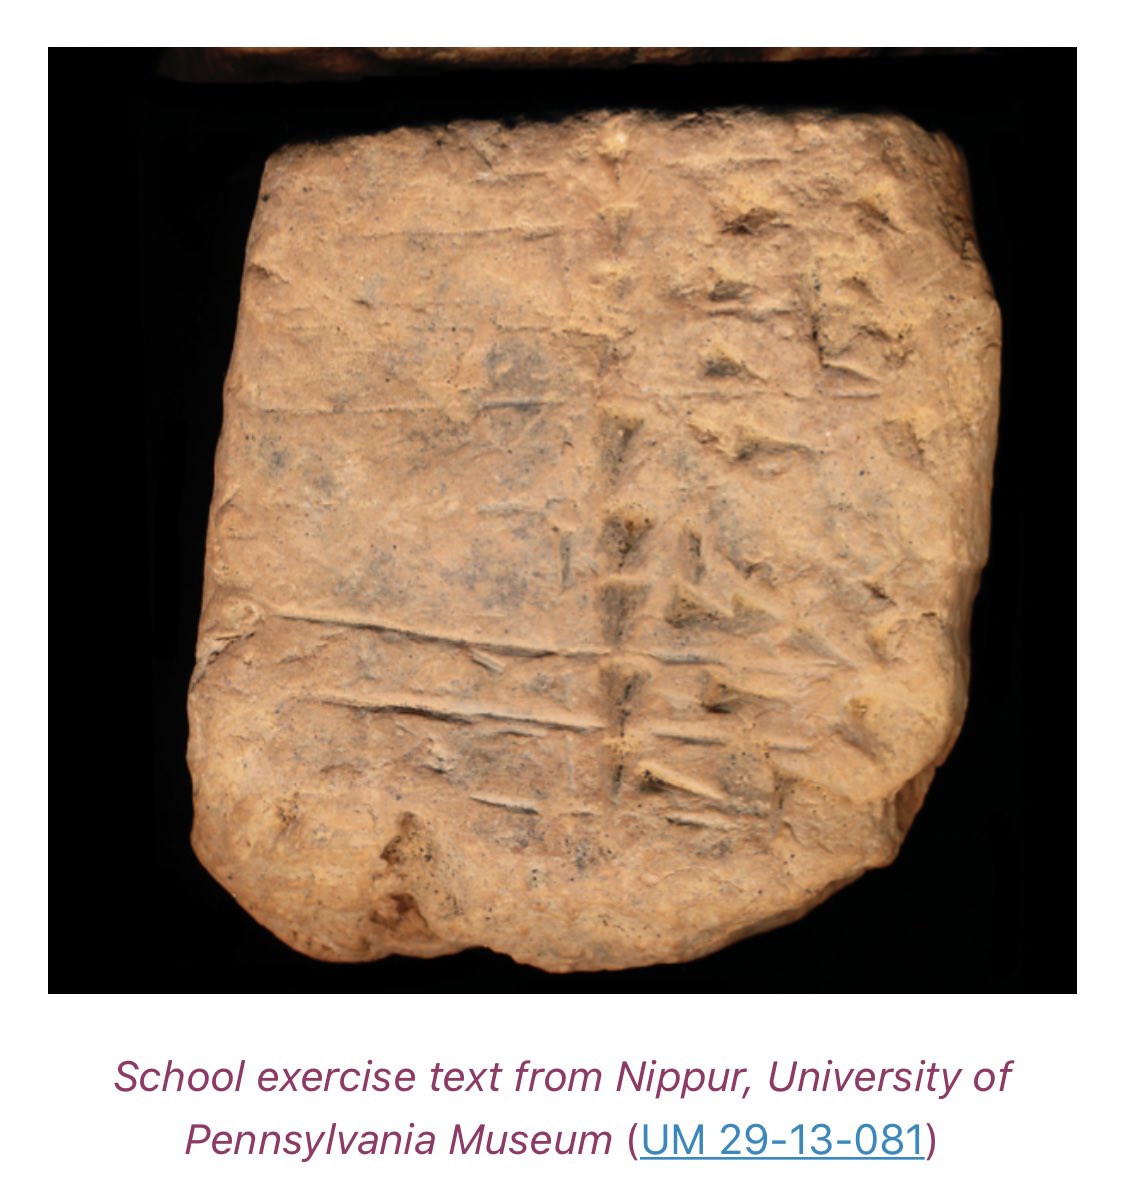 I wrote about Babylonian schools in this short post for  @Papyrus_Stories If you love ancient history, and learning about individuals and their lives, then you will love her blog  https://papyrus-stories.com/2019/09/23/schoolboy-where-have-you-been-going-so-long-the-old-babylonian-student-and-school/amp/#click=https://t.co/SAk9fUVwwN